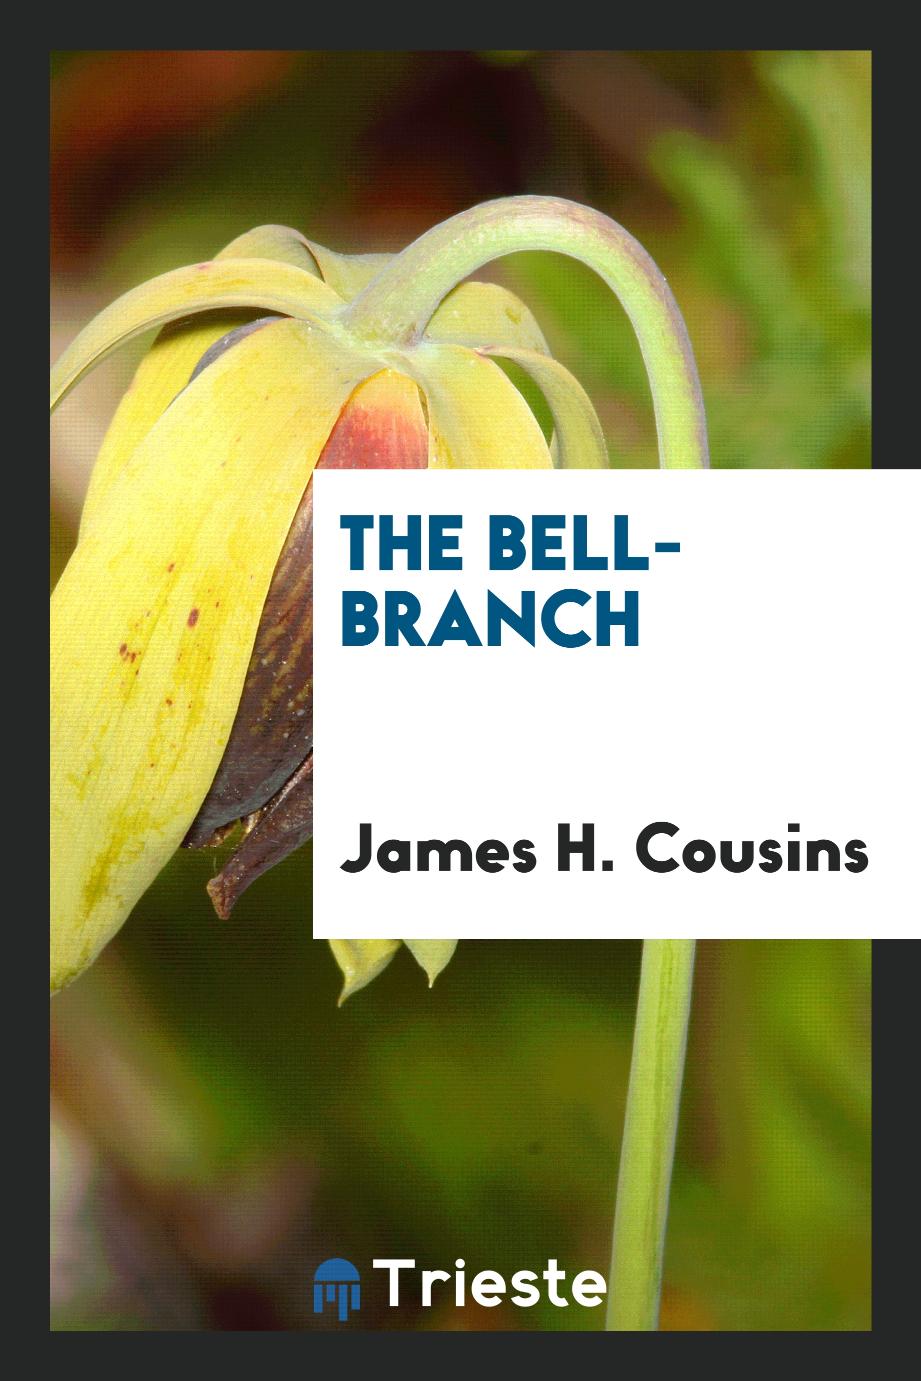 The bell-branch